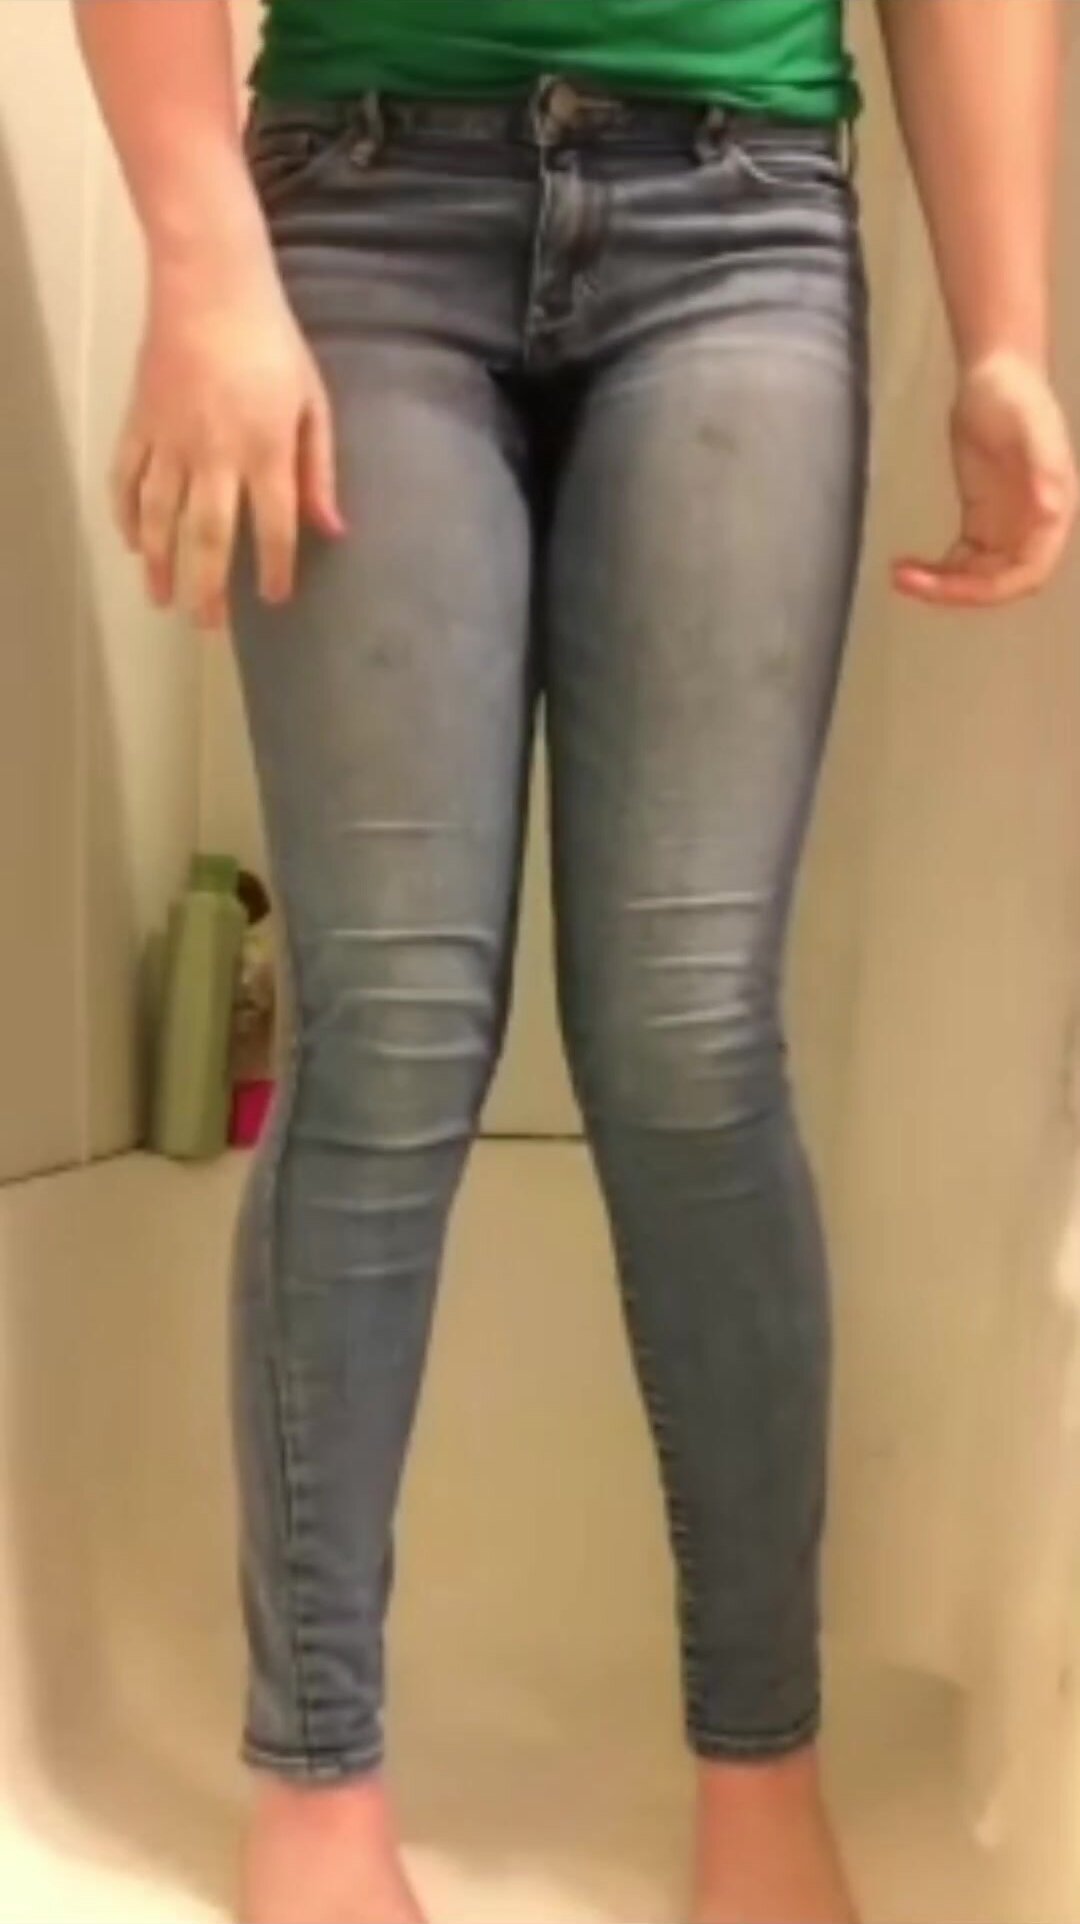 Pissing herself - video 3